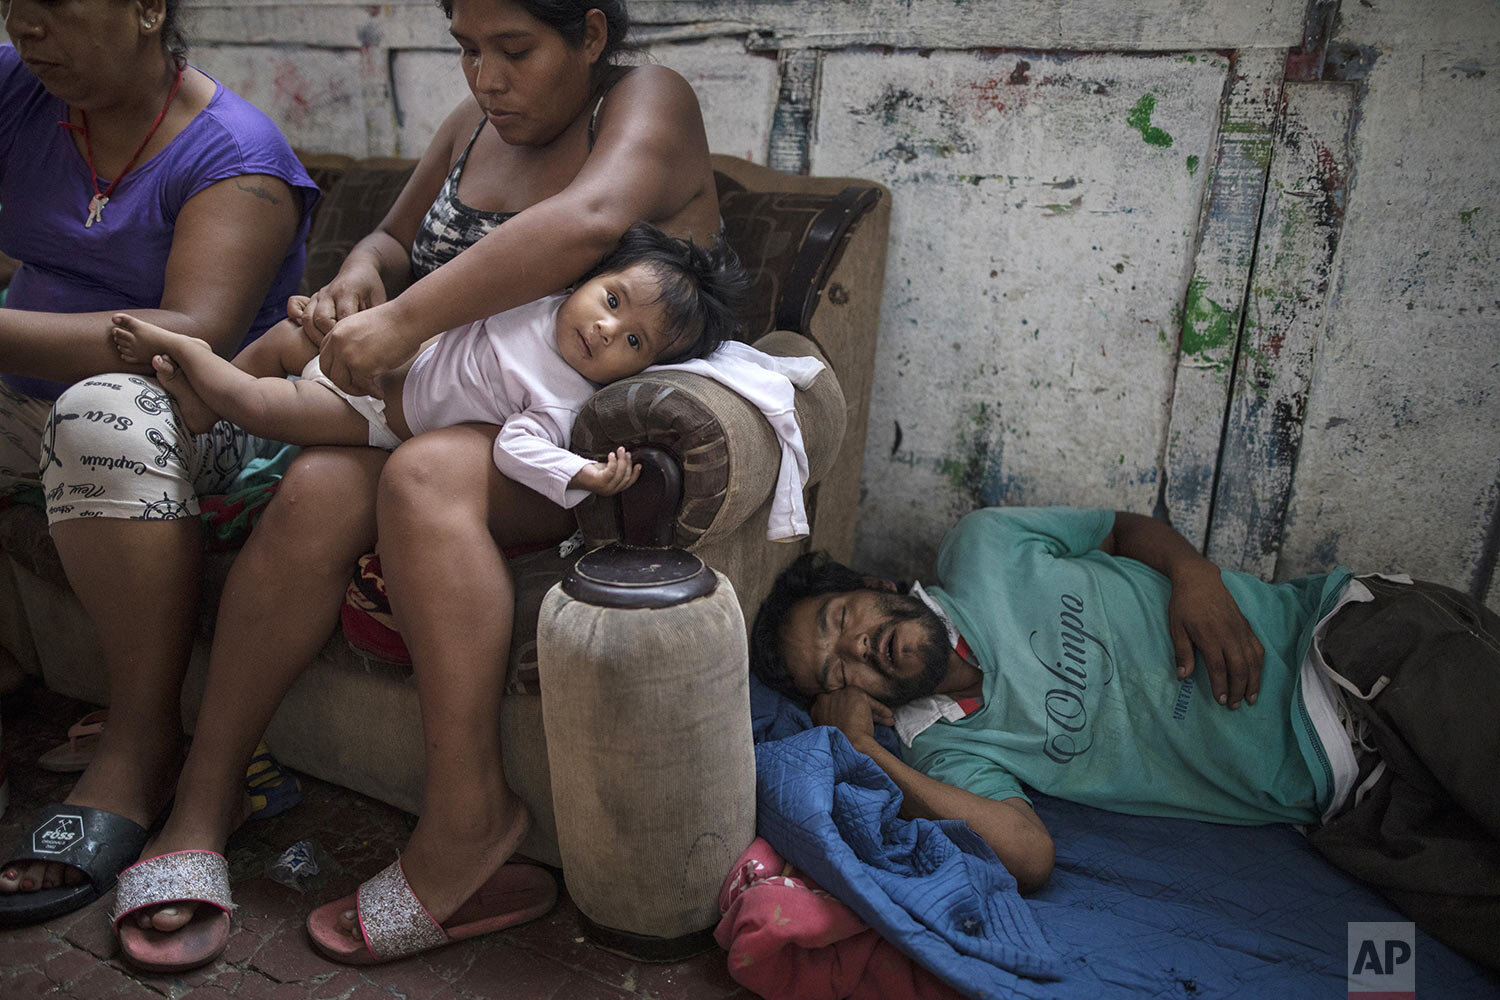  In this March 29, 2020 photo, Ivonne Garcia changes her daughter's diaper in her small room while her homeless cousin naps nearby, in the deteriorating building nicknamed "Luriganchito," after the country's most populous prison, in Lima, Peru. (AP P